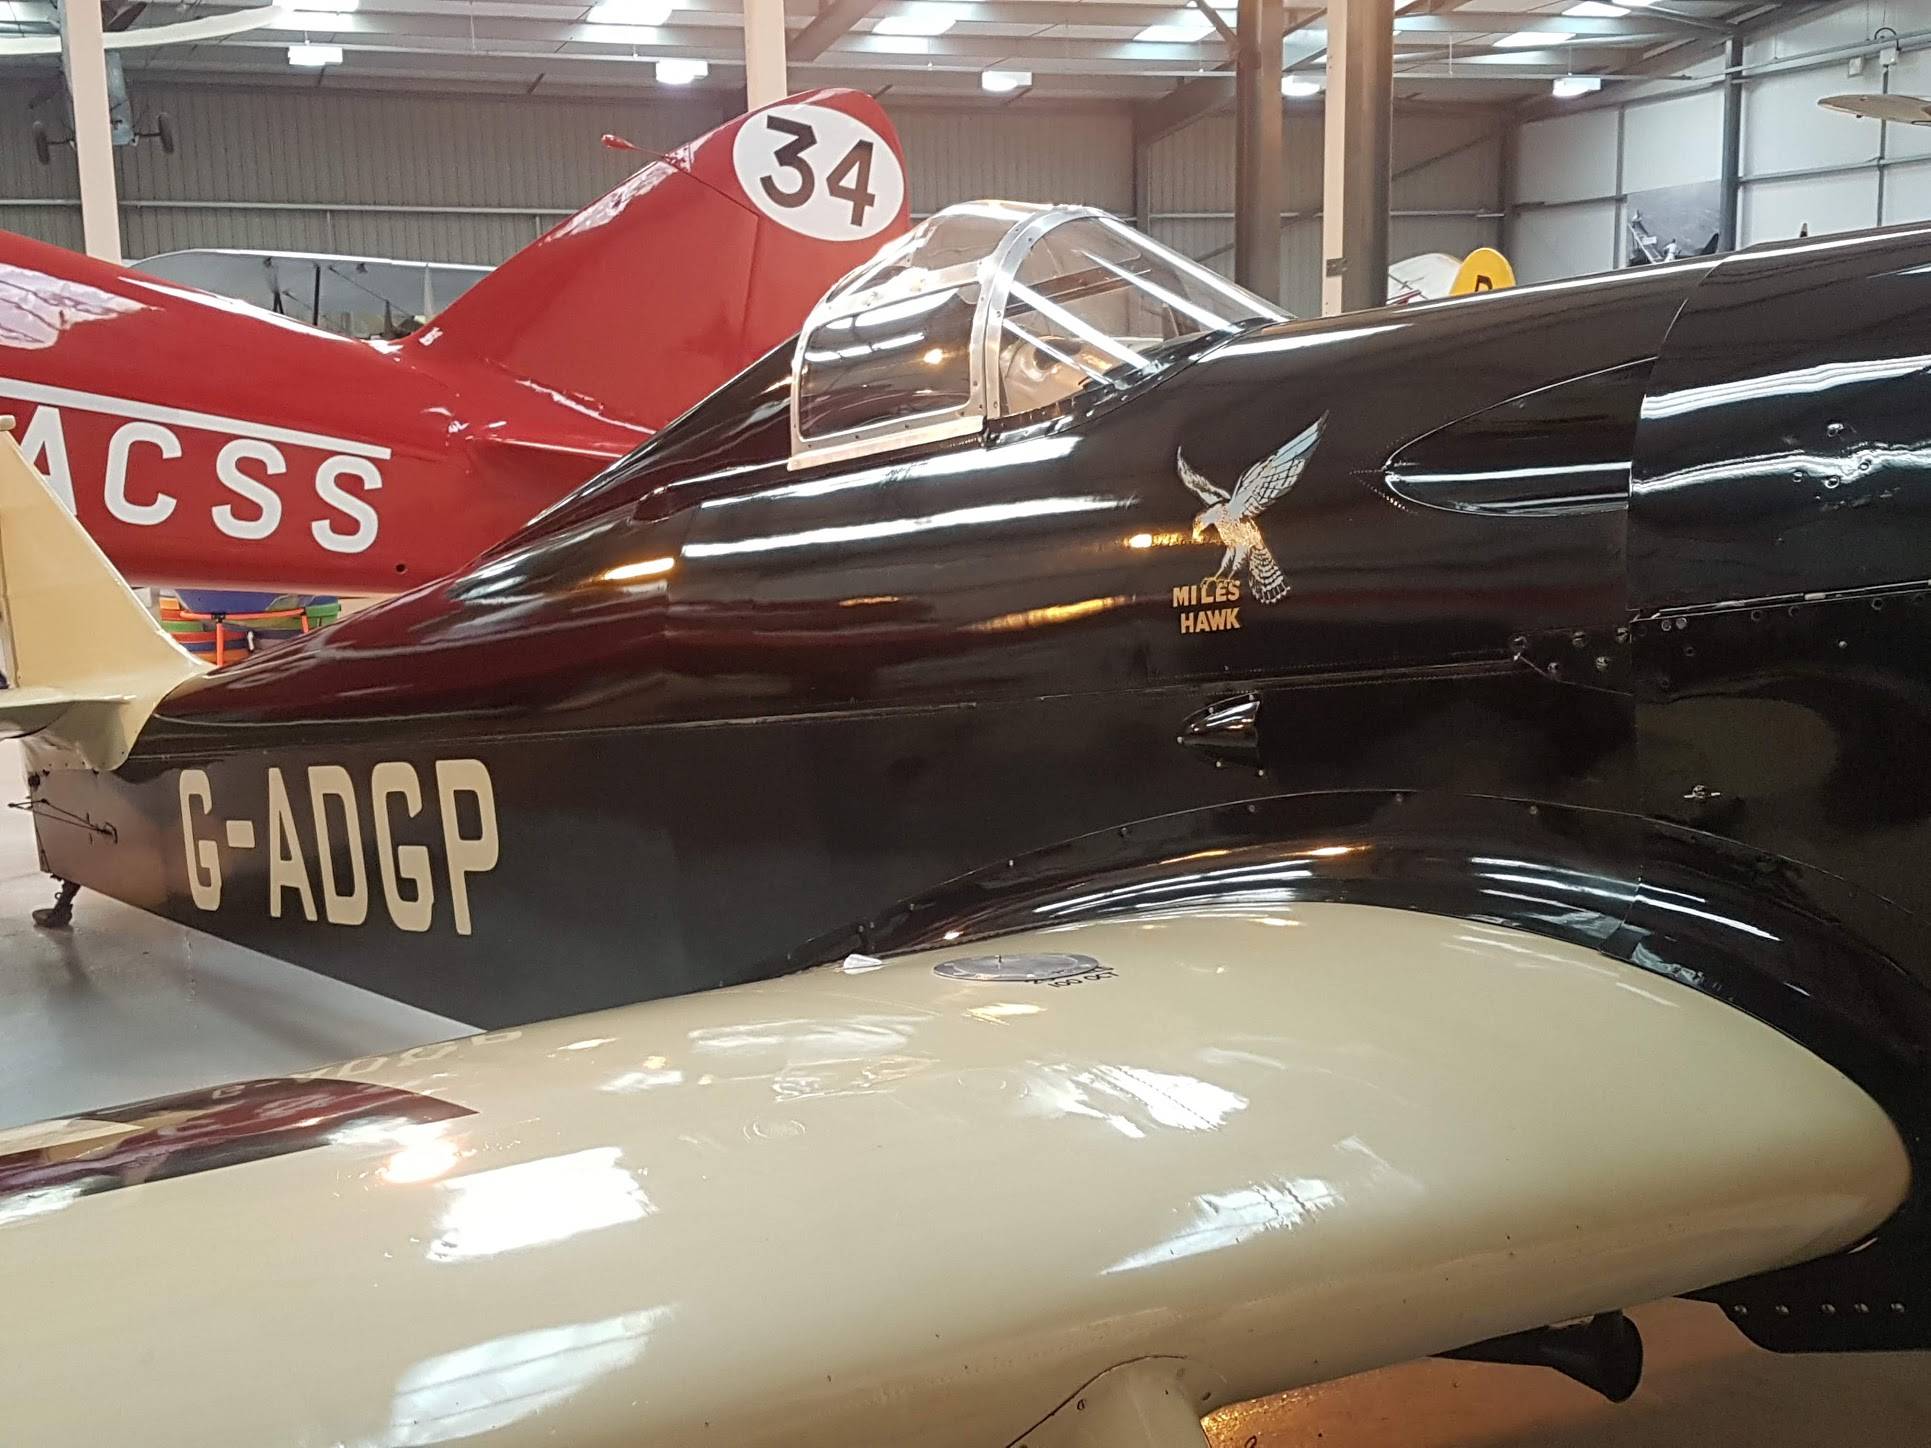 Vintage Aircraft at the Shuttleworth Collection